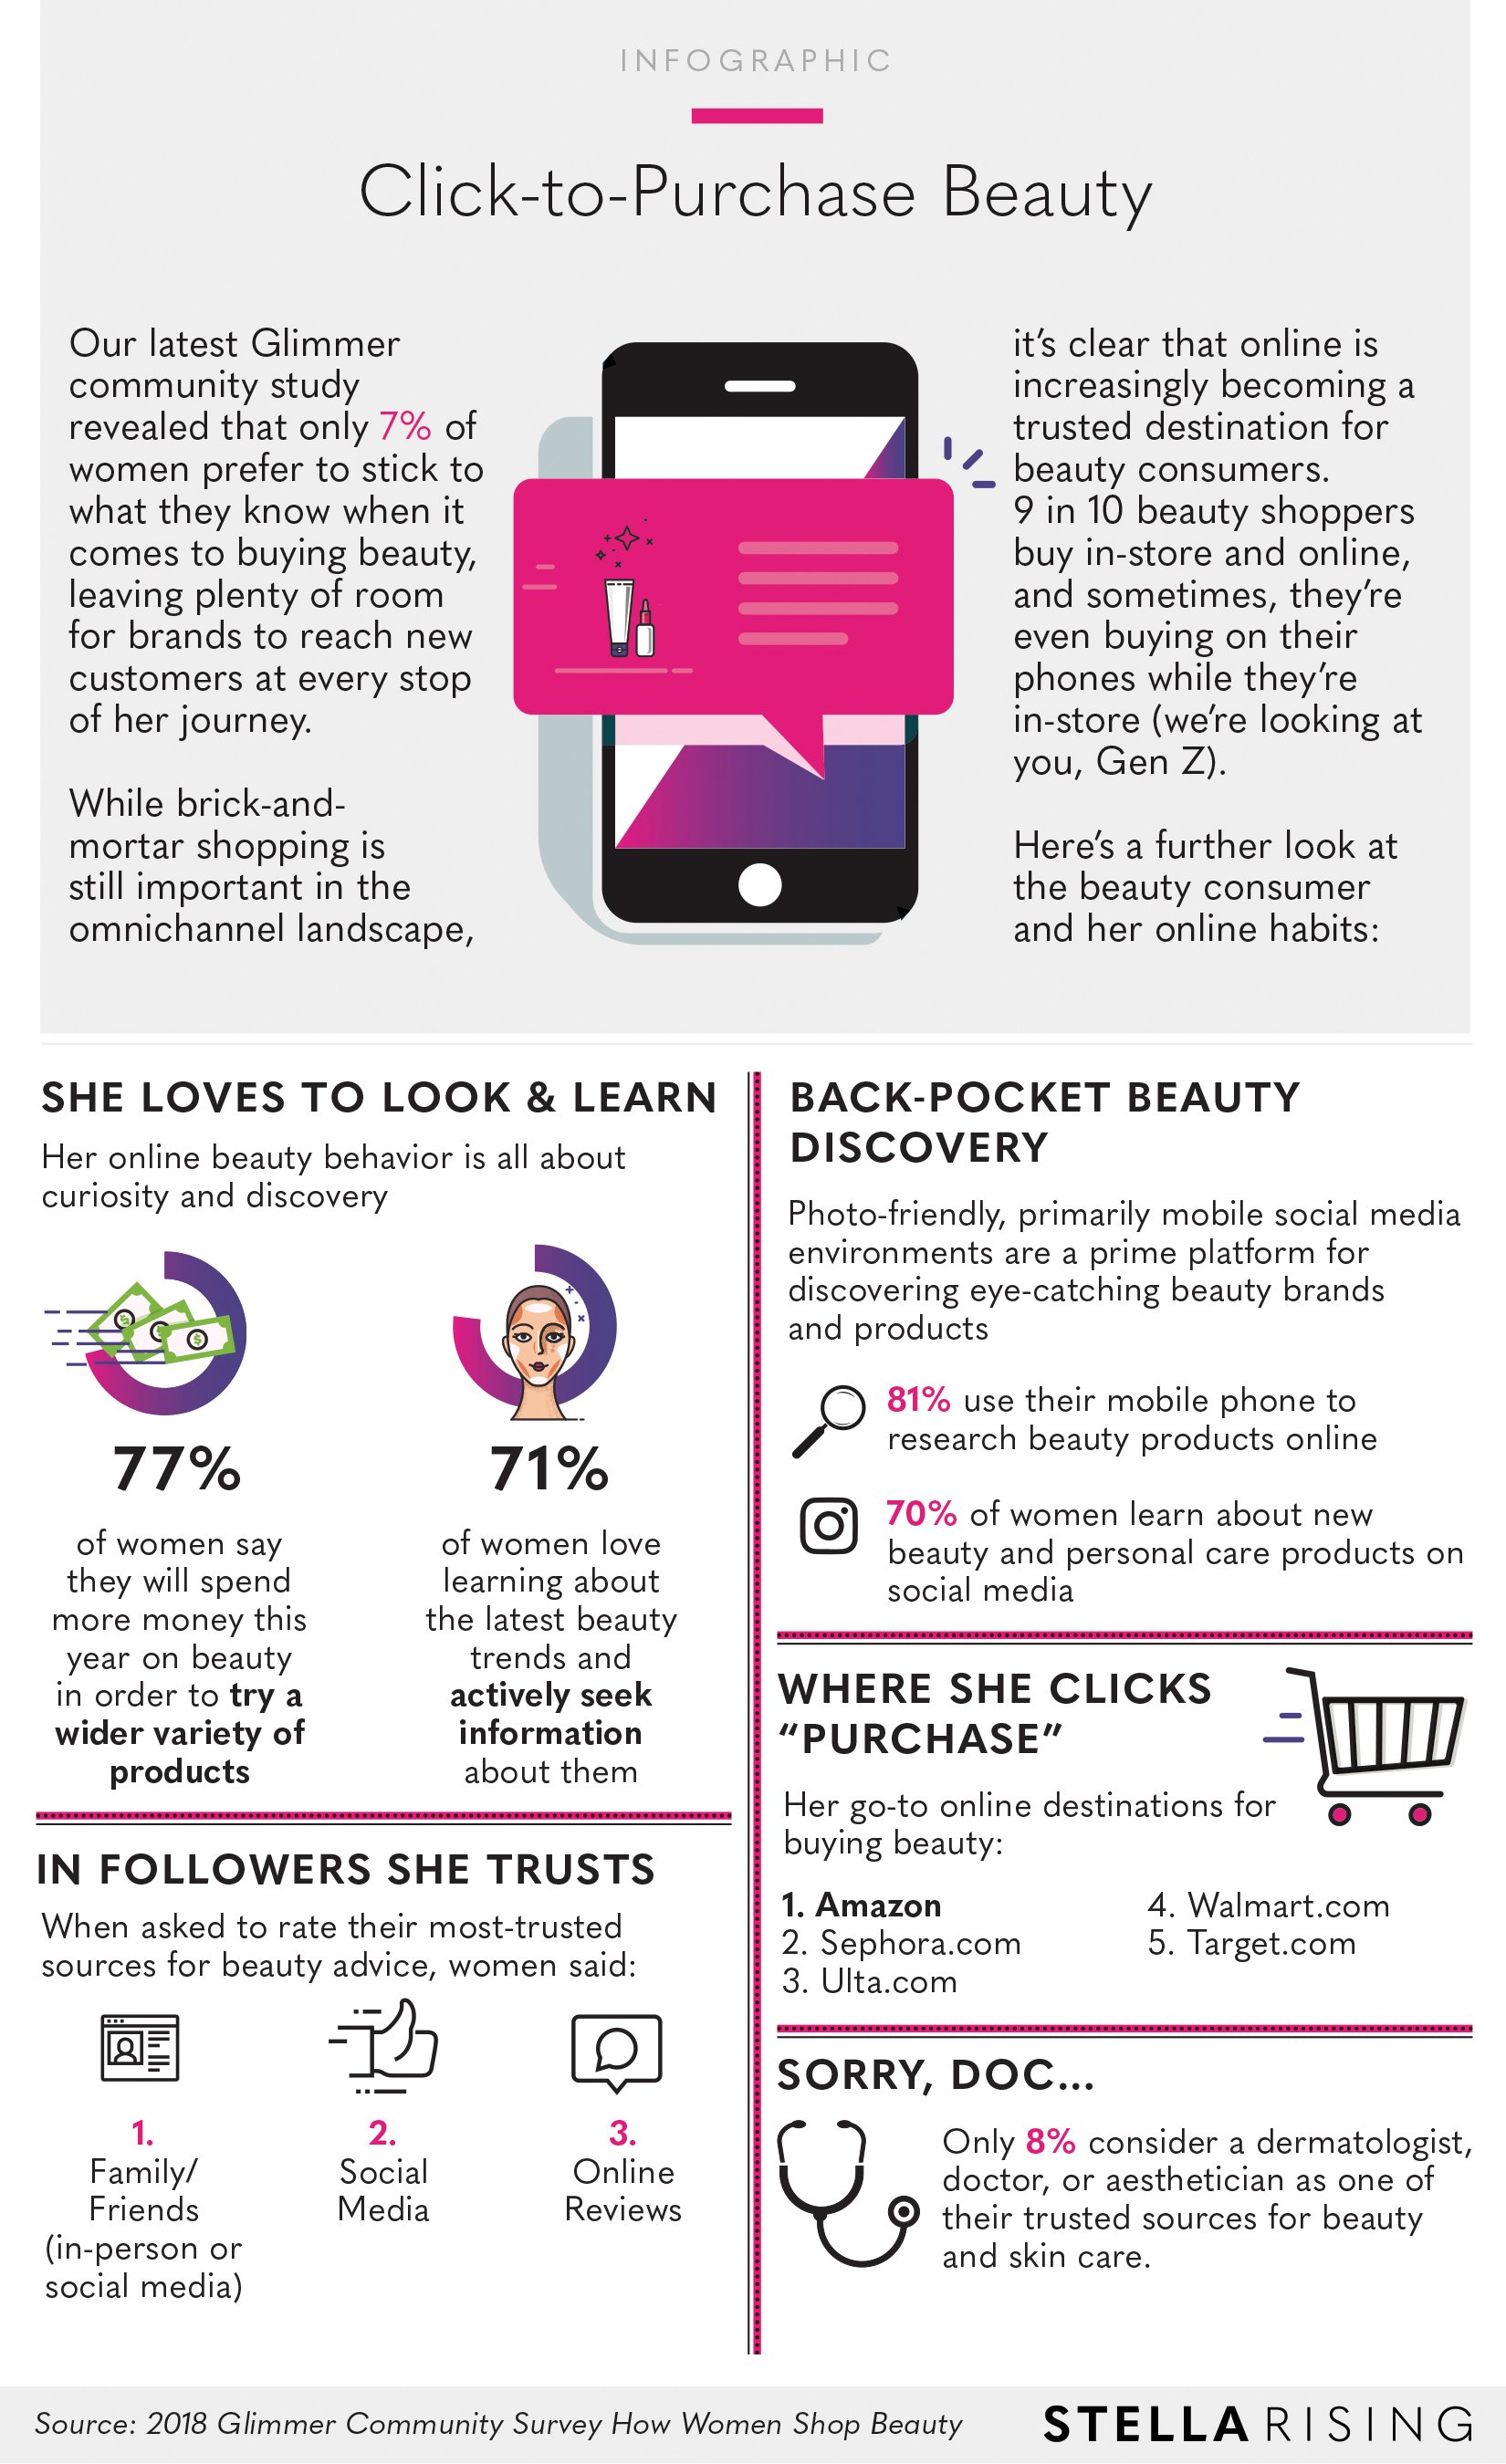 Infographic_ClicktoPurchaseBeautyLG